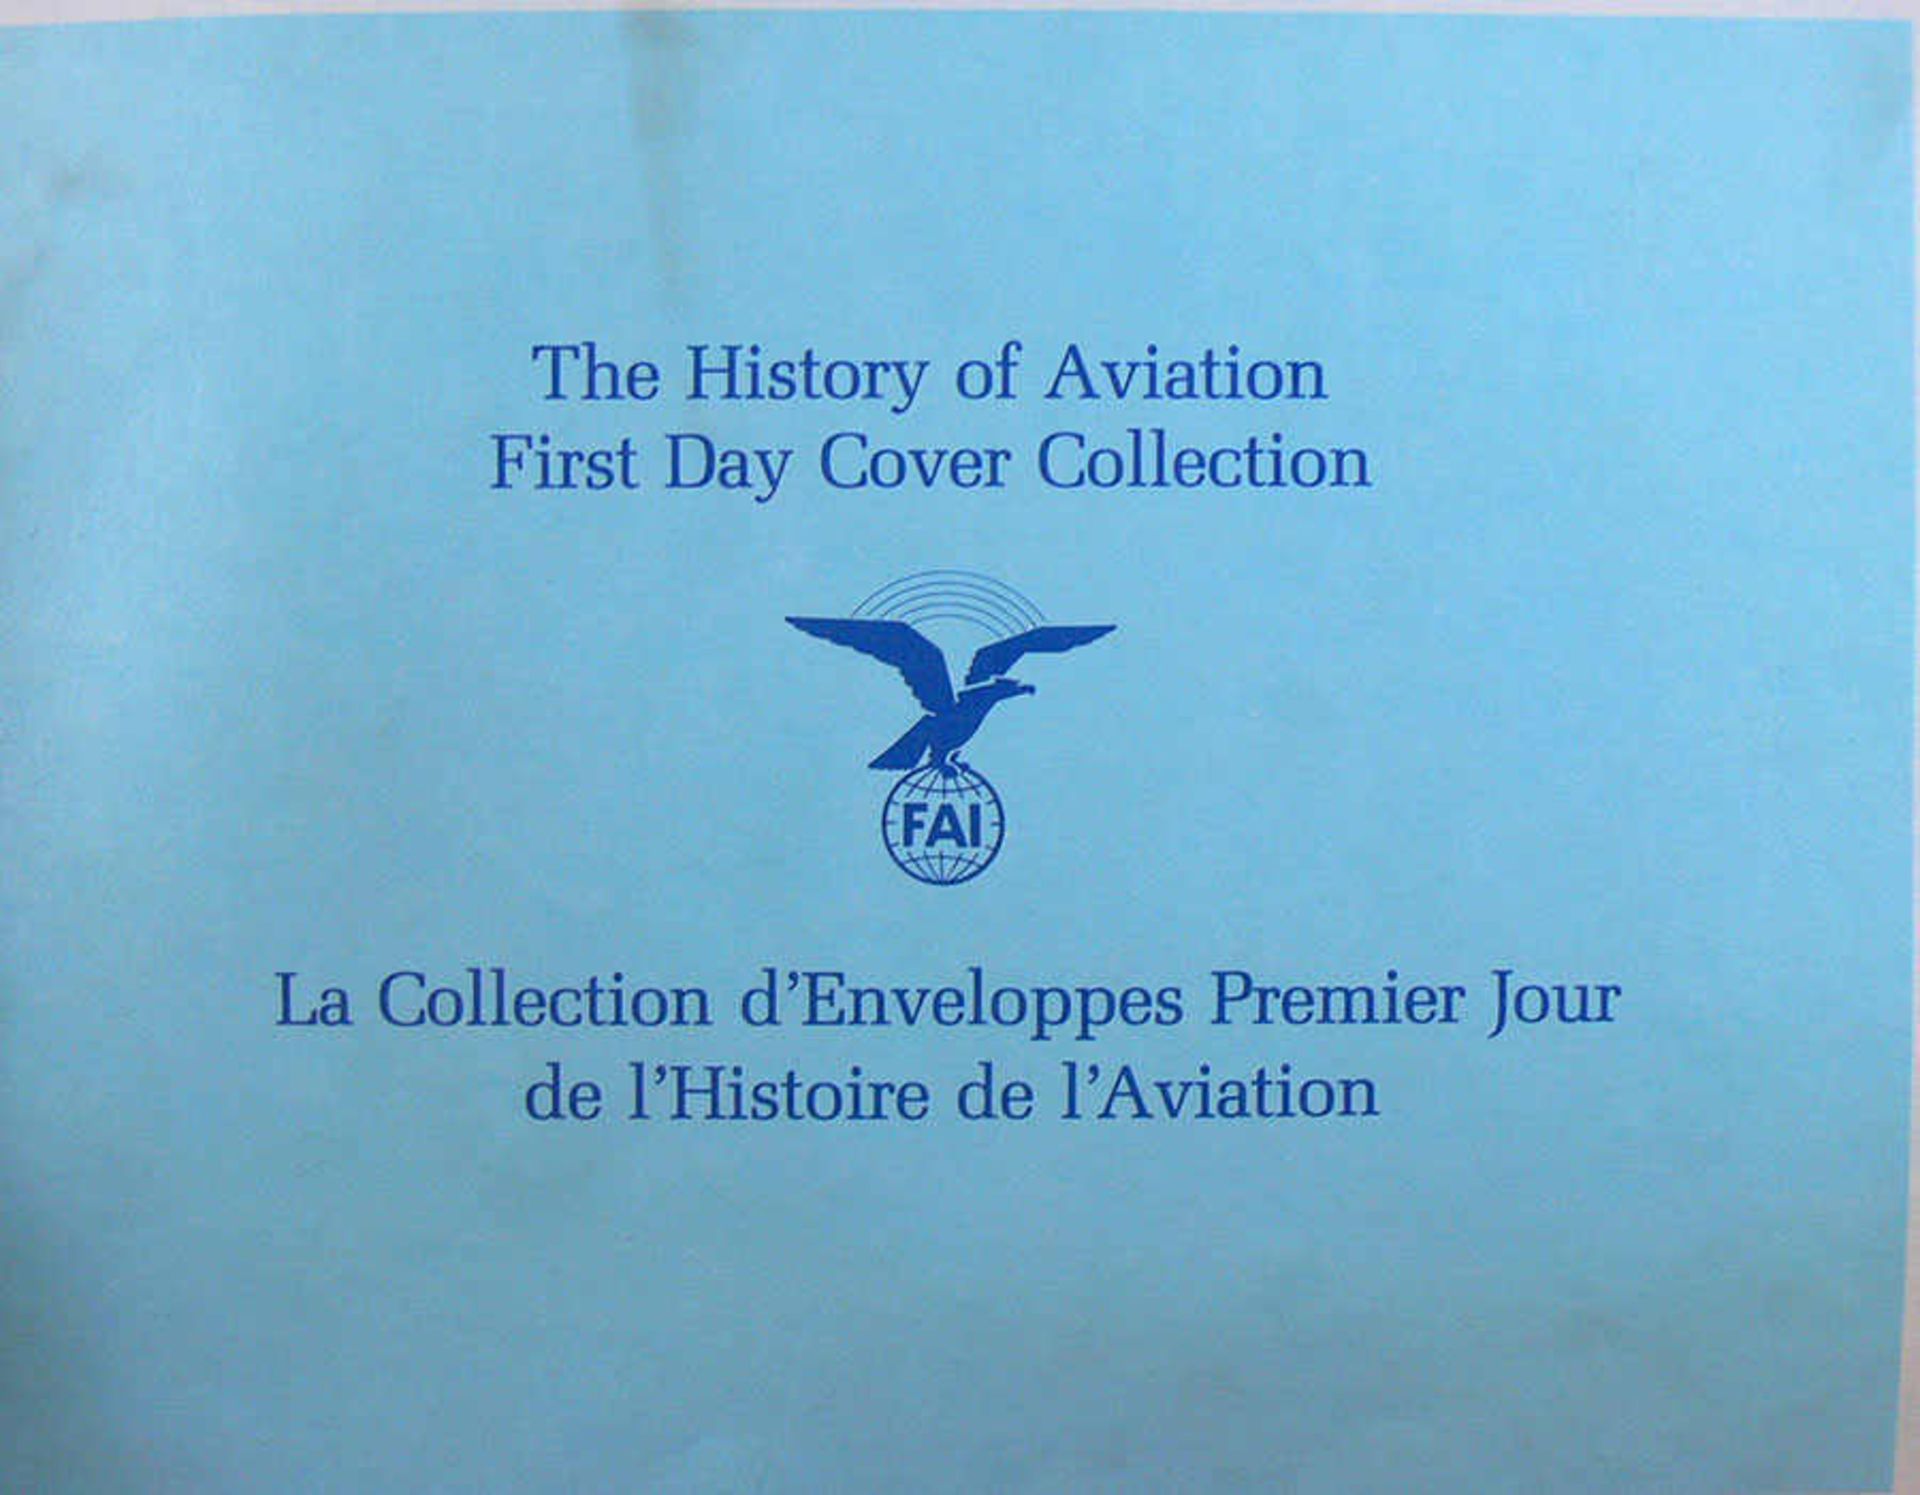 Sammlung Ersttagsbriefe "The History of Aviation - First Day Cover Collection".Bitte besichtige